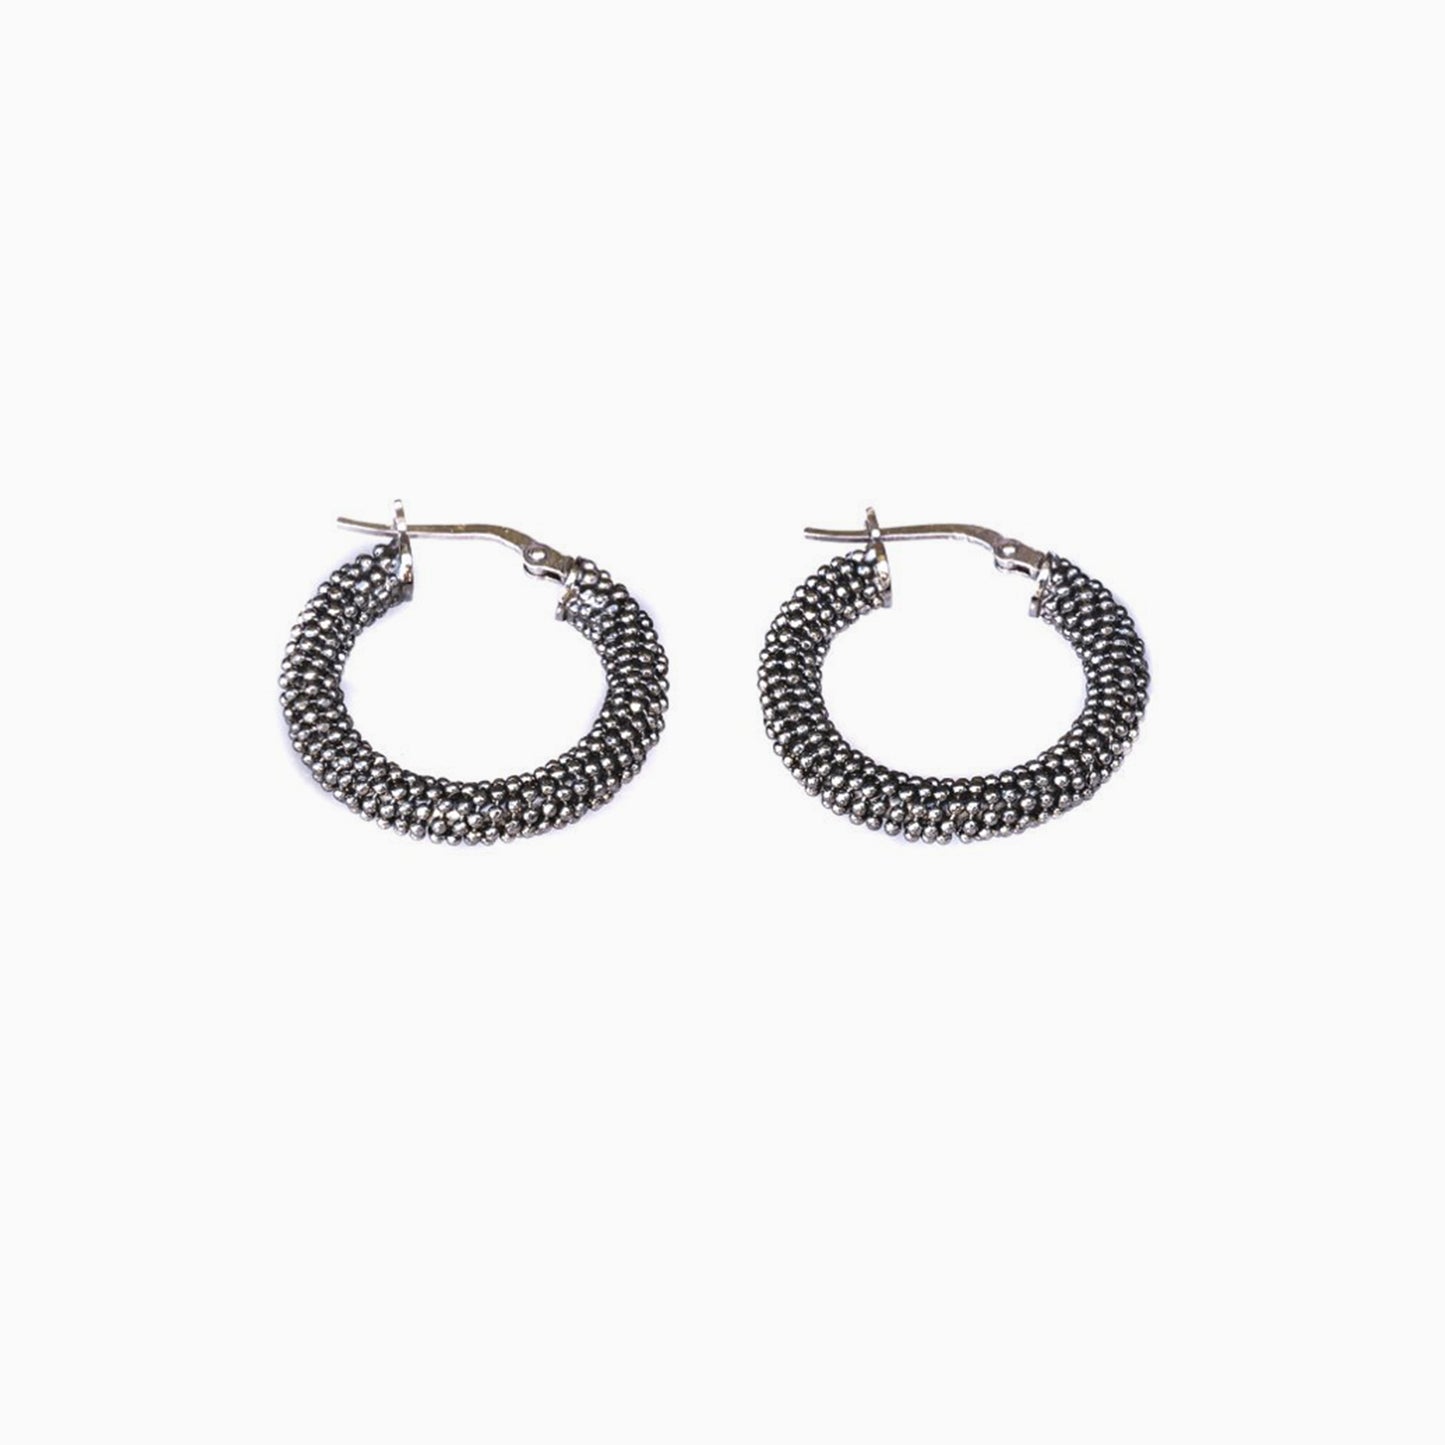 Black Gold Plated Mesh Earrings on a white background